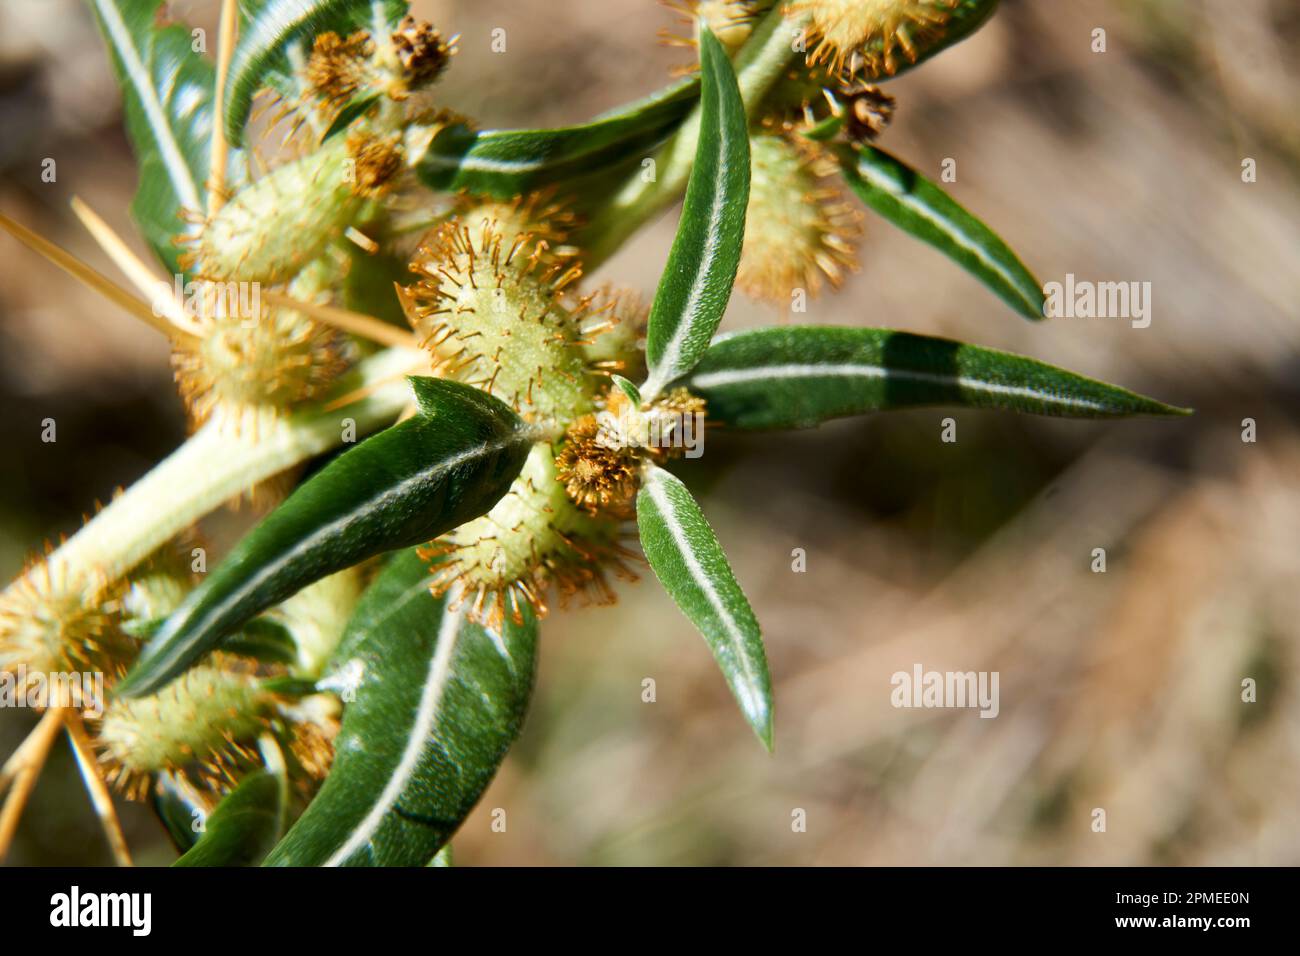 Macro images of Bathurst Burr or Xanthium spinosum an introduced invasive weed pest. Stock Photo